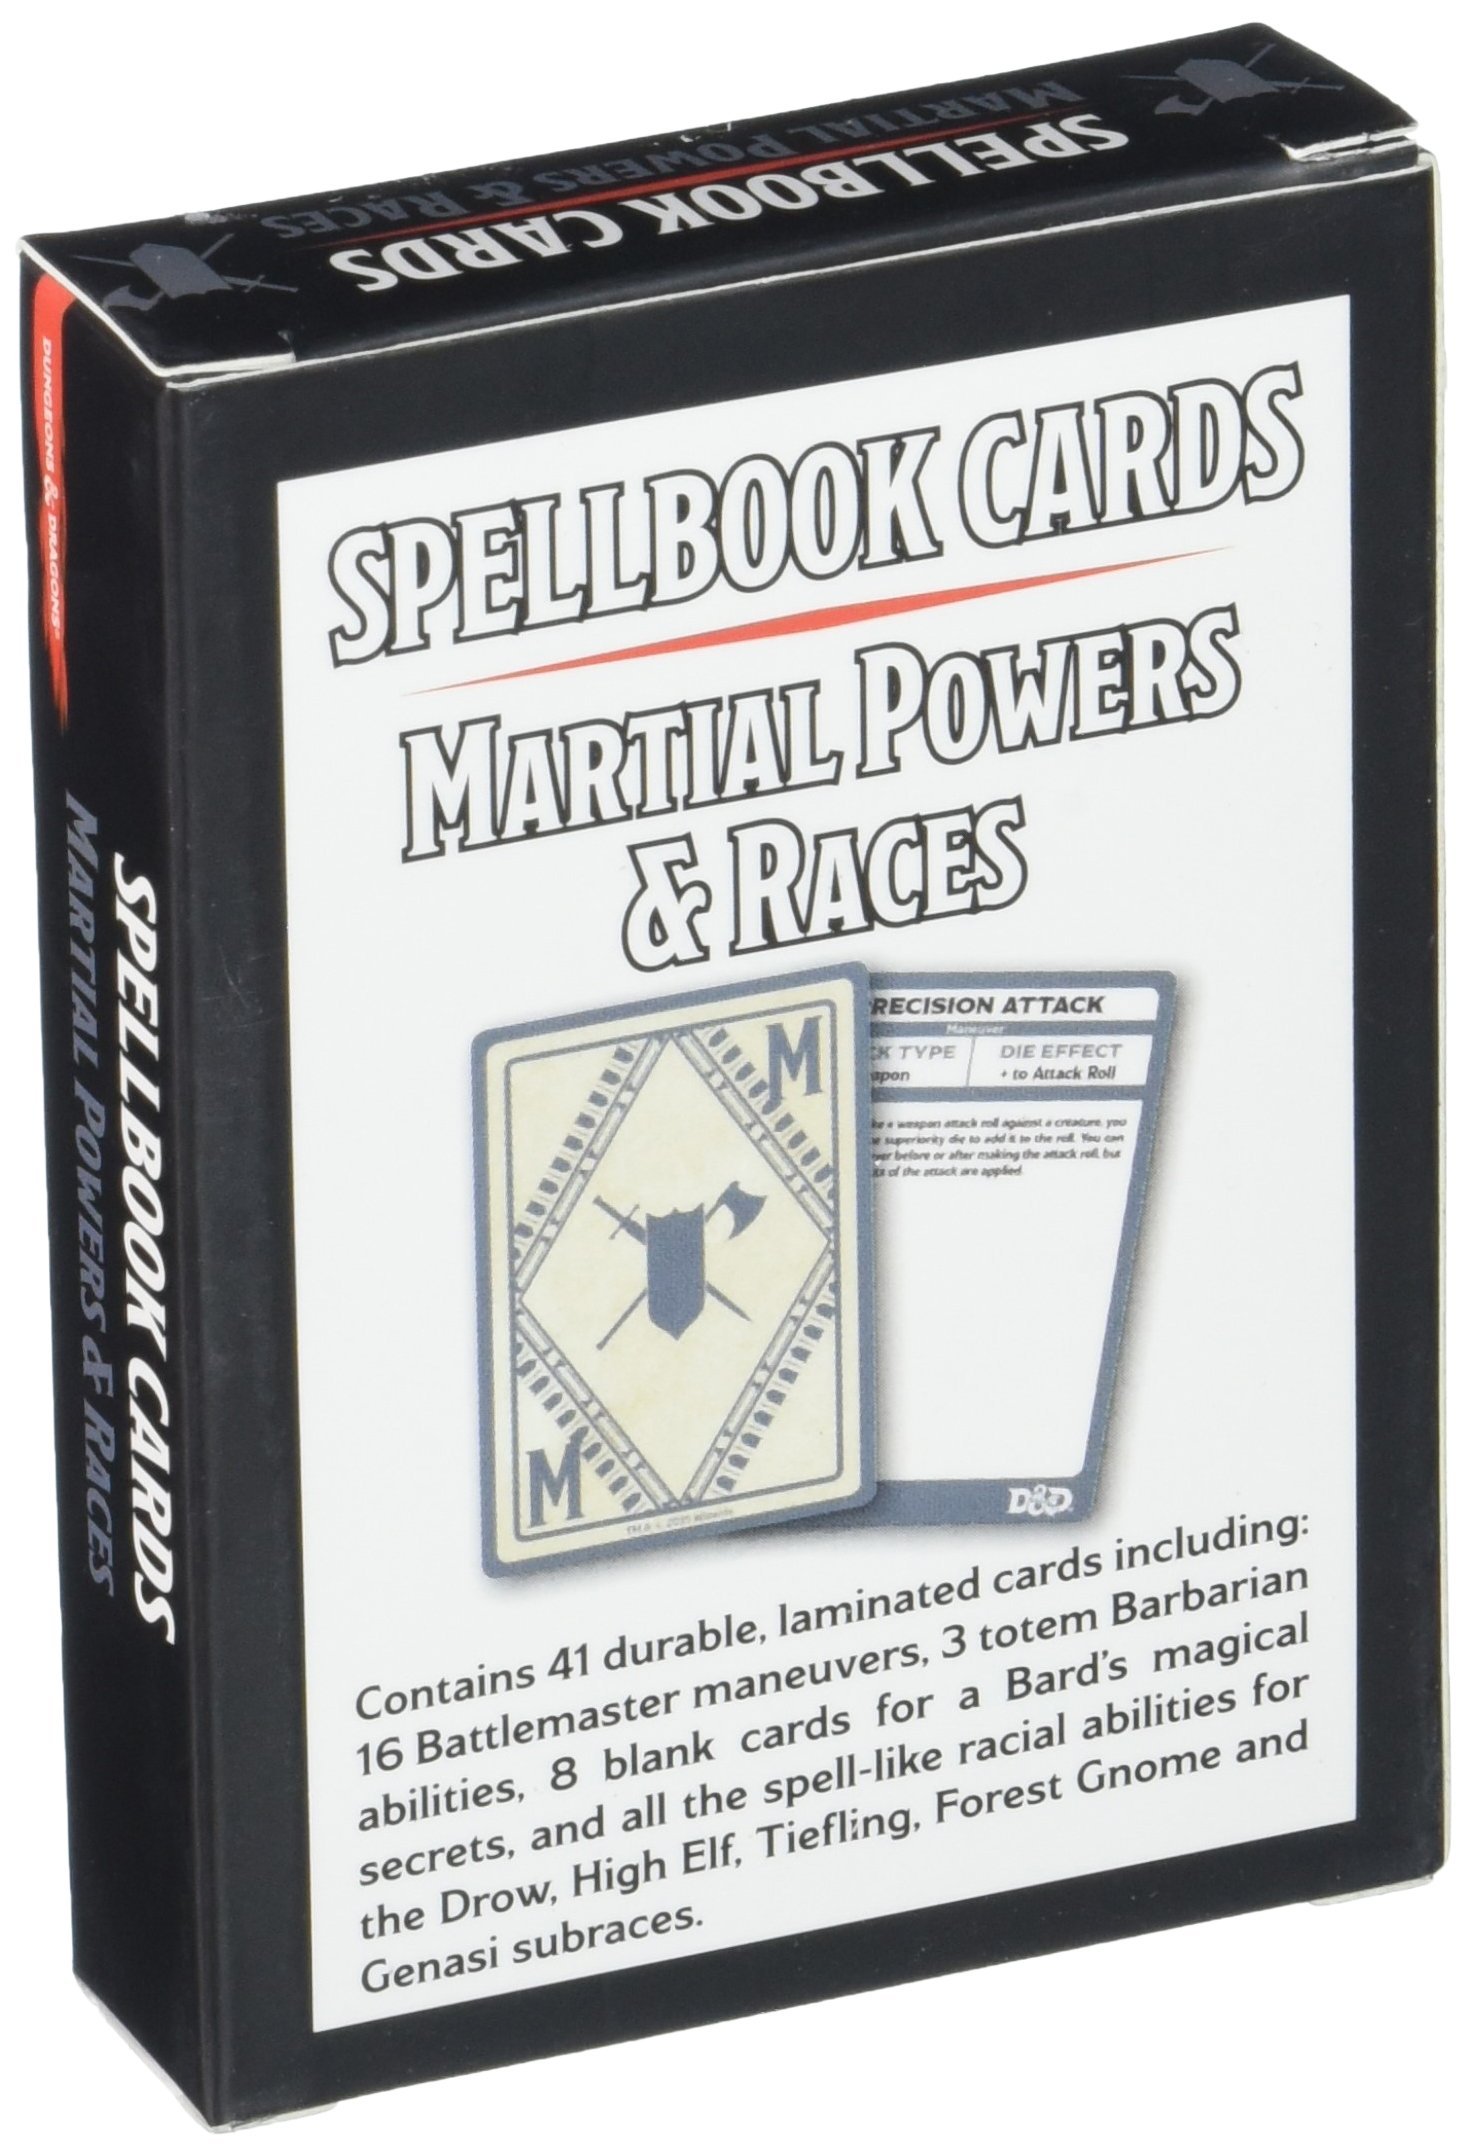 D&D Spellbook Cards Deck (Martial Powers and Races) - $20.95